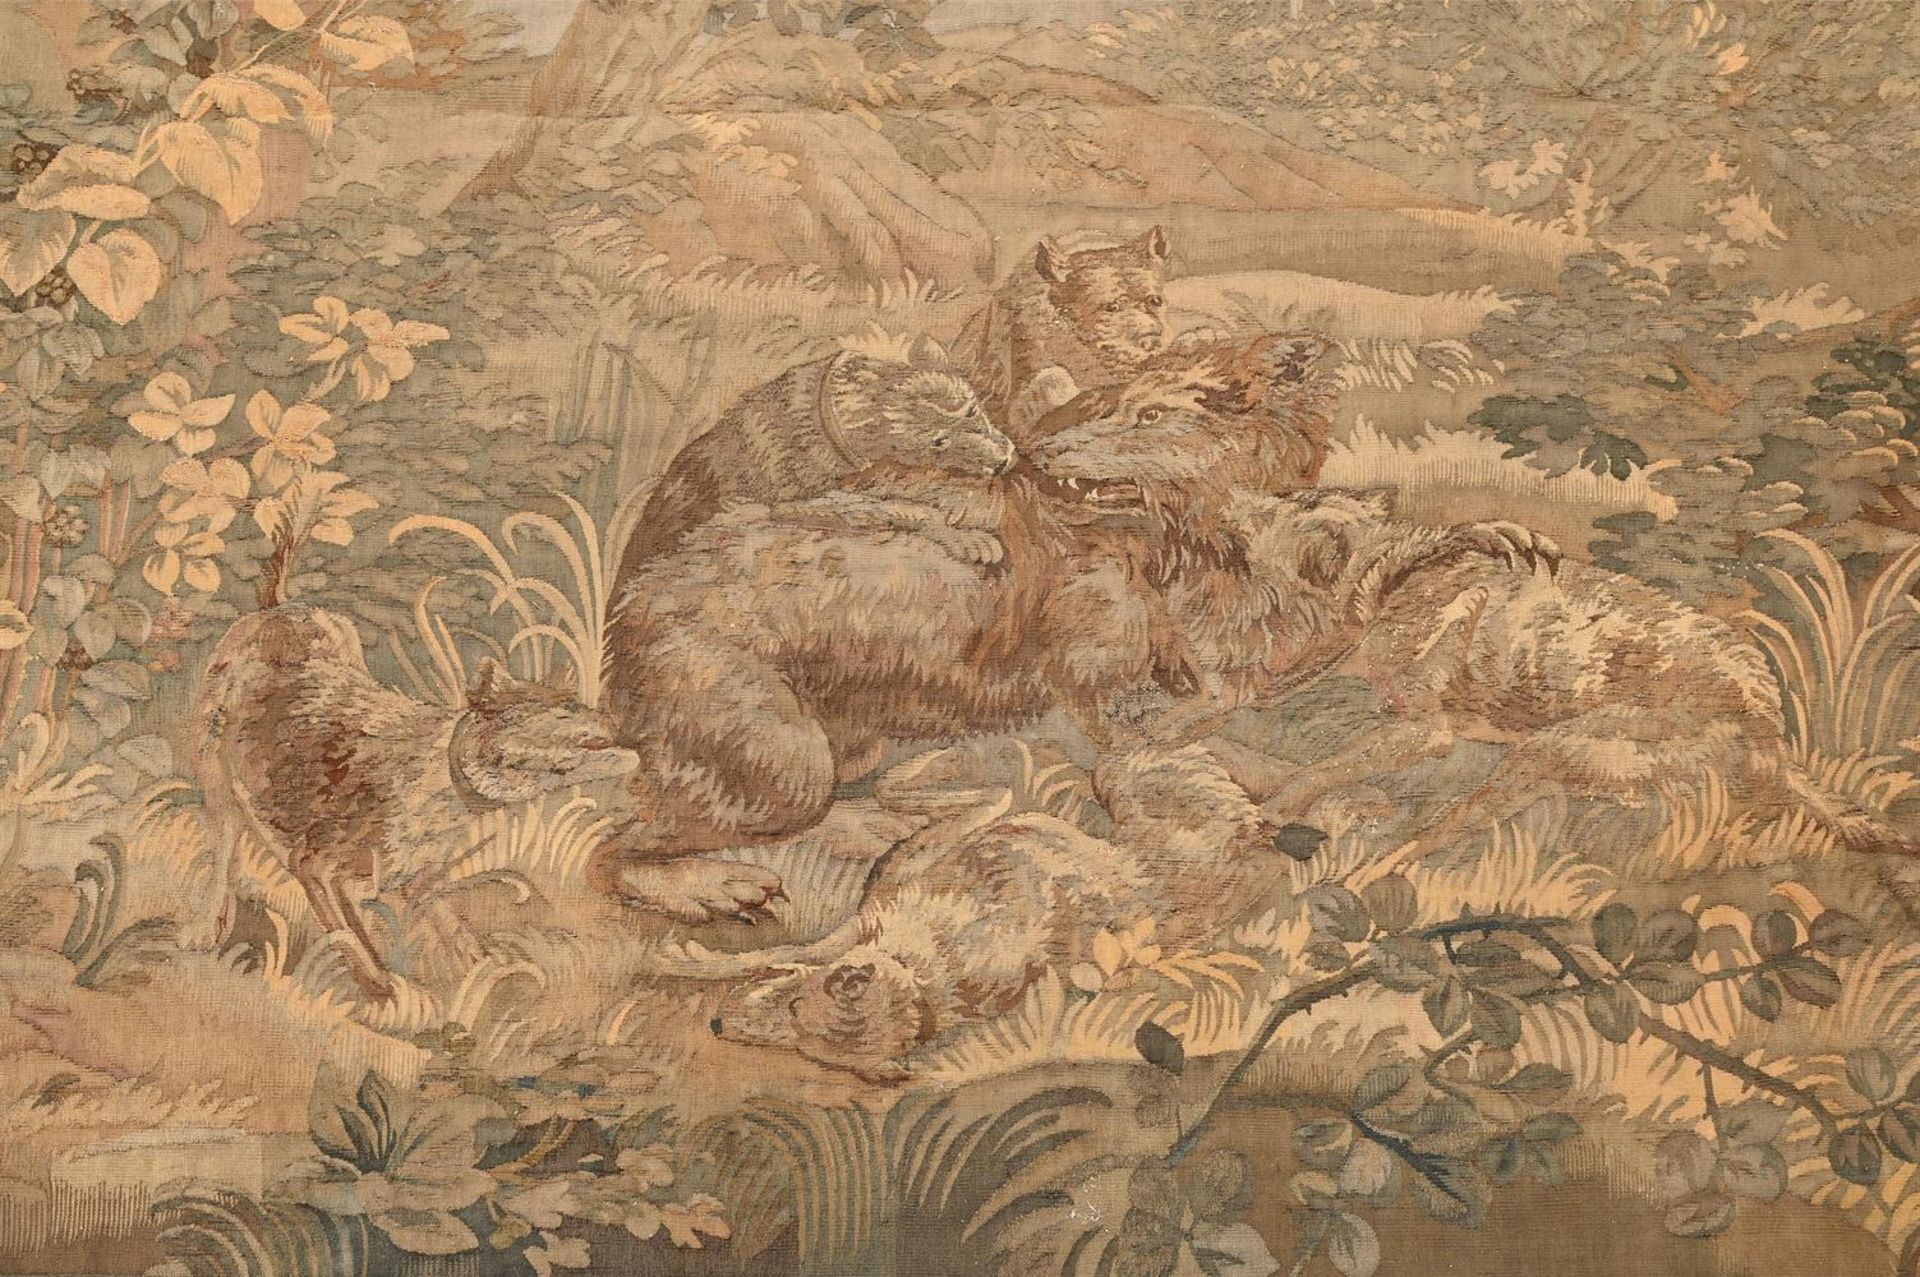 A CONTINENTAL VERDURE TAPESTRY, PROBABLY 17TH CENTURY - Image 2 of 3